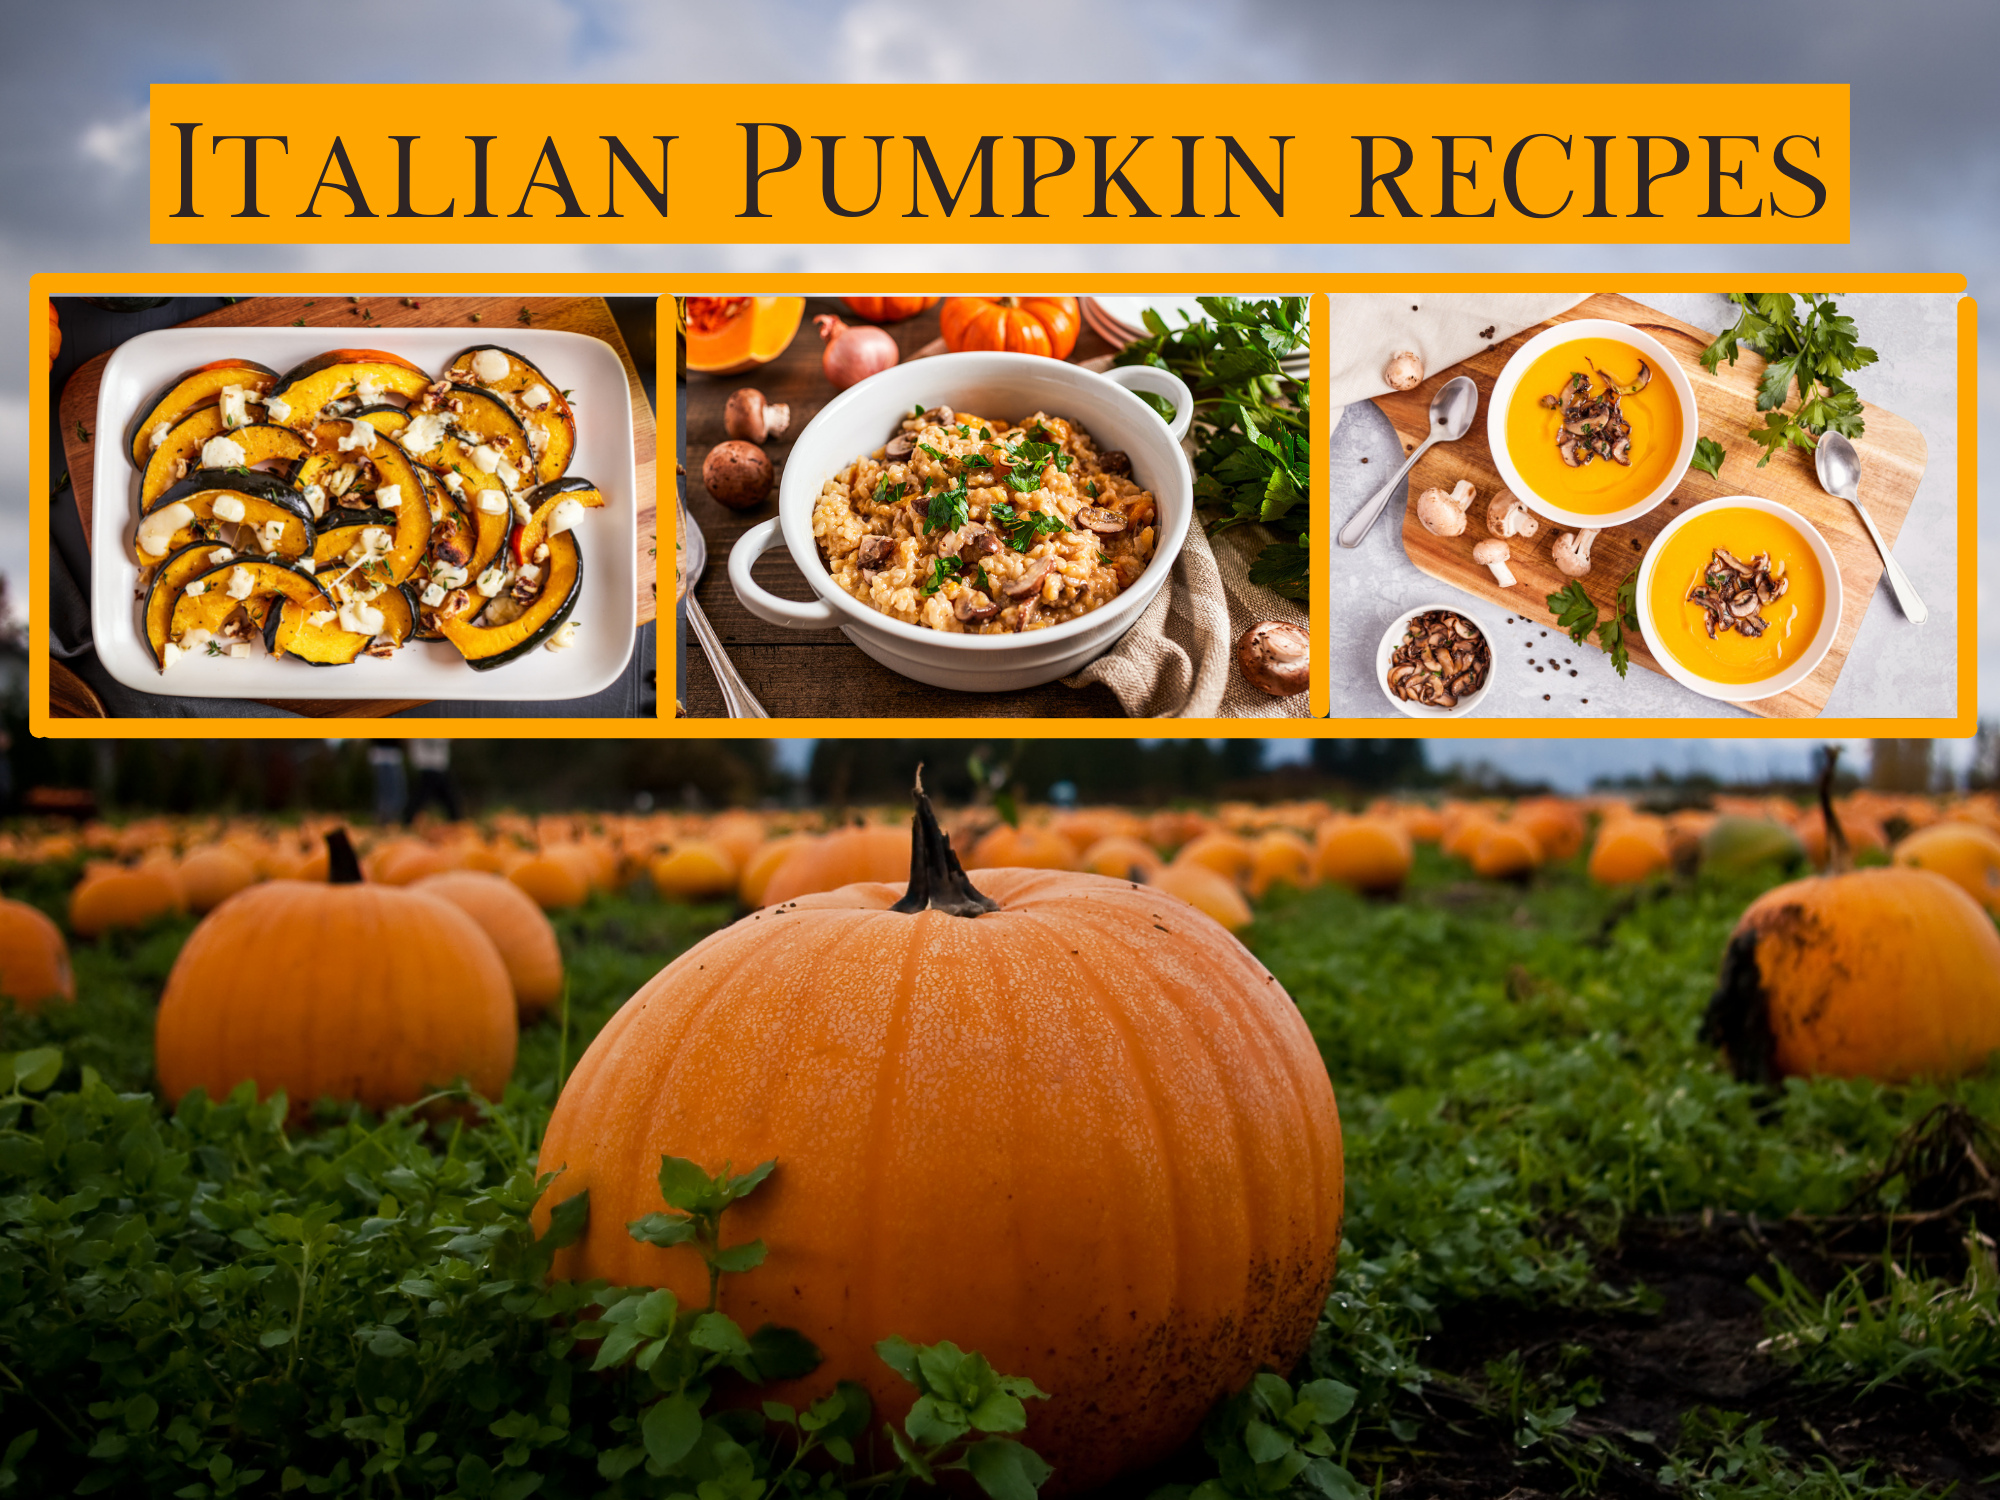 Pick of the Patch Pumpkin Recipes